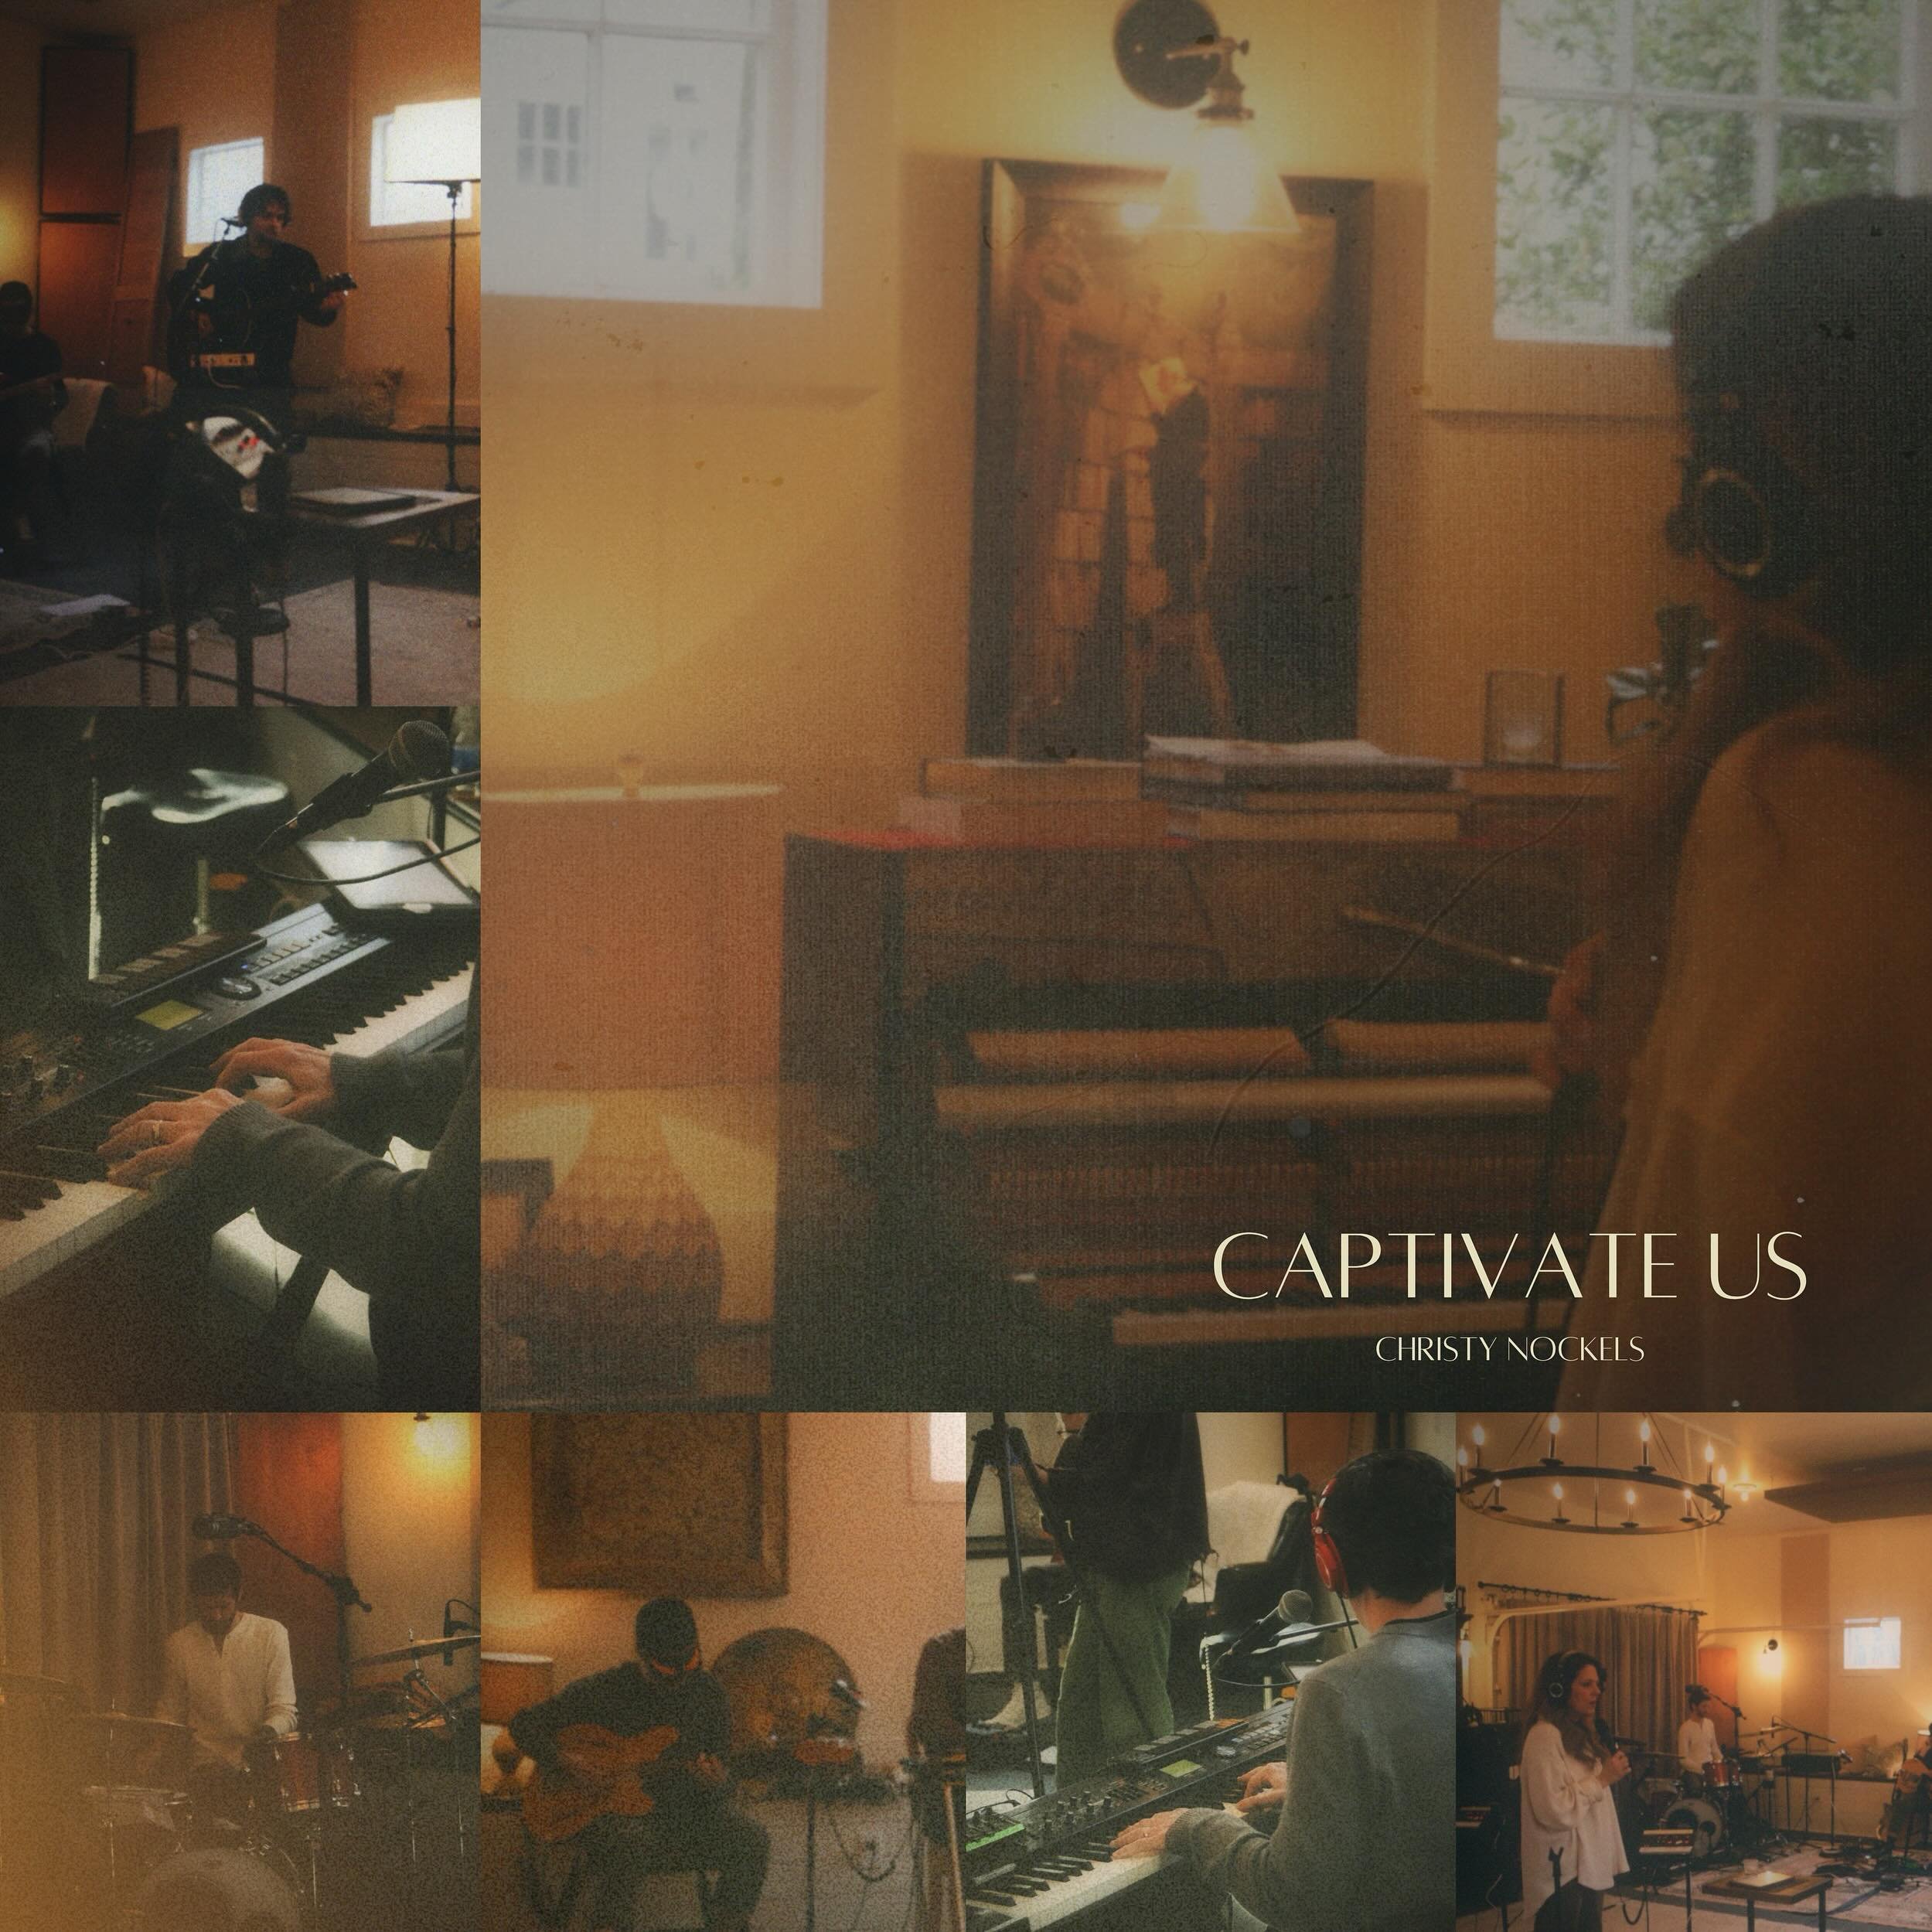 It&rsquo;s OUT Y&rsquo;ALL!!! &ldquo;Captivate Us: Live from Keeper&rsquo;s Branch&rdquo; is AVAILABLE NOW, everywhere you listen to music!!! This album has been a moment to pause and say, &ldquo;Thanks be to God&rdquo; for leading us this far, and f